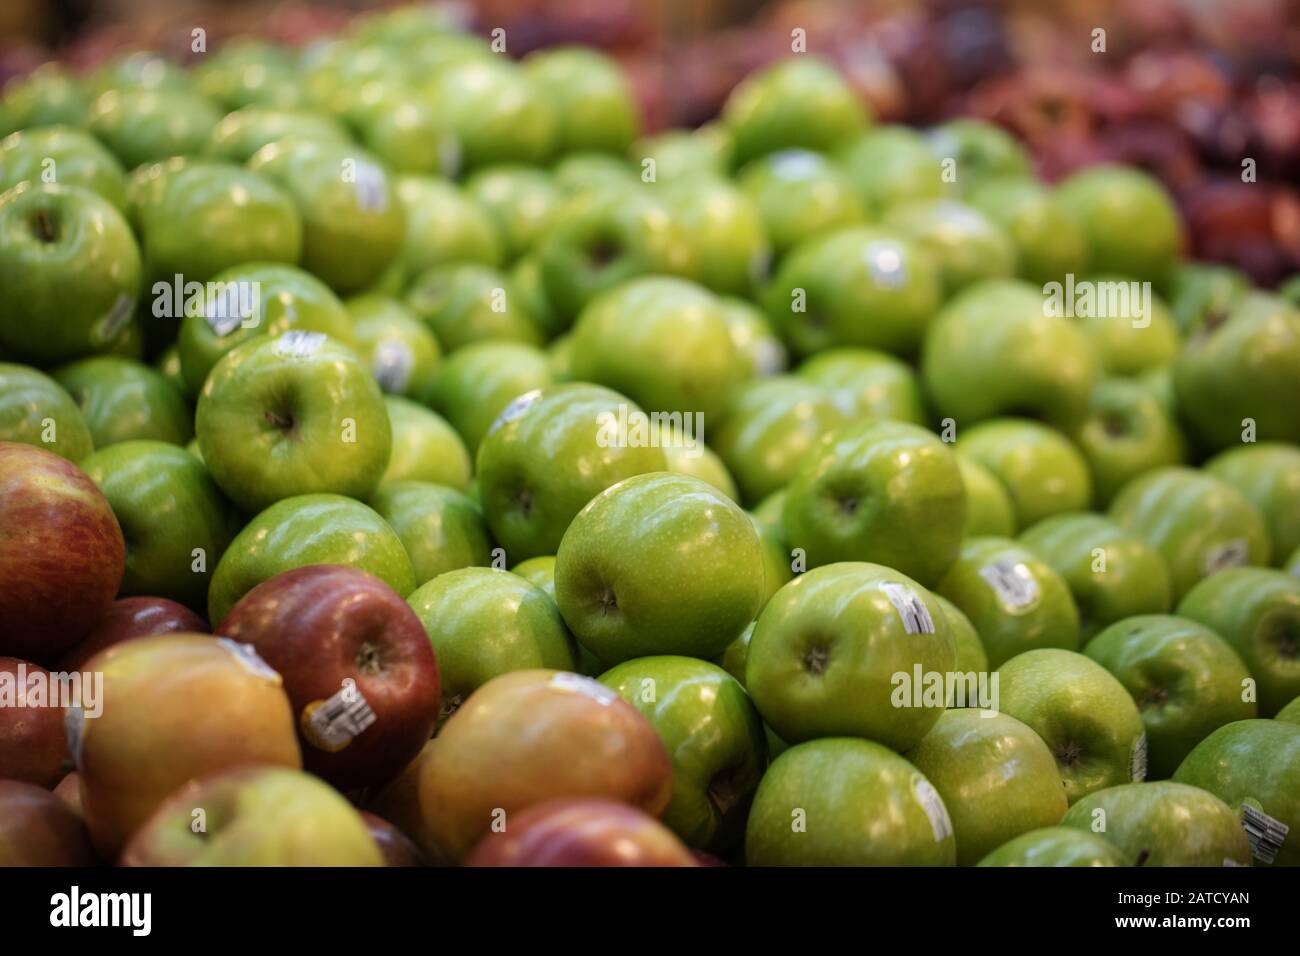 red and green apples on display in a fruit shop market with bar code stickers on them Stock Photo